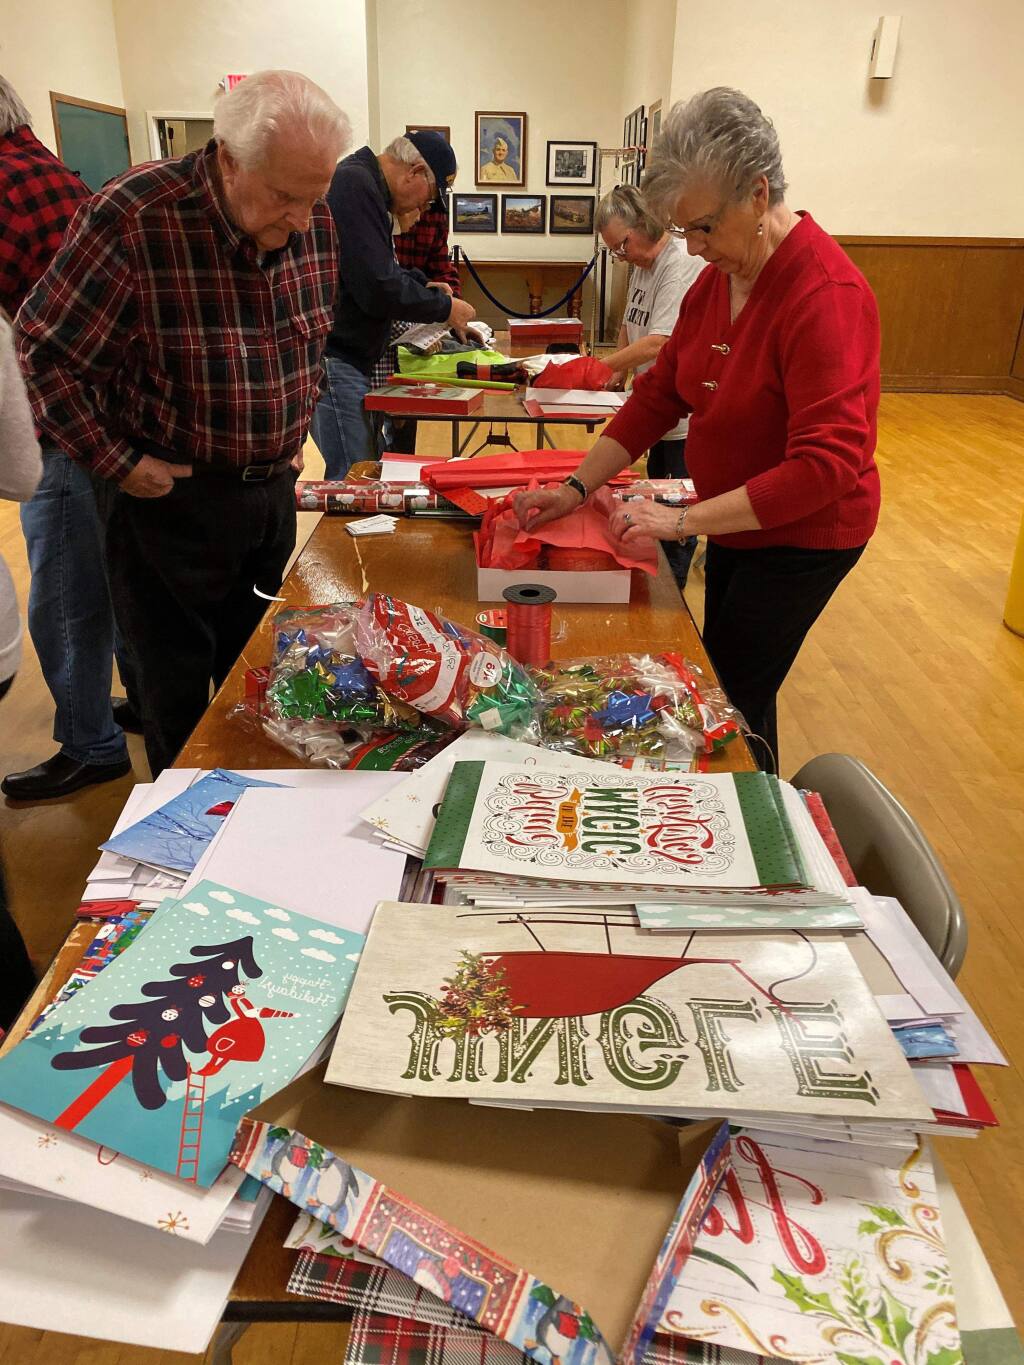 AMVETS volunteers stuffed dozens of boxes with Christmas gifts for veterans. (Emily Charrier/Index-Tribune)